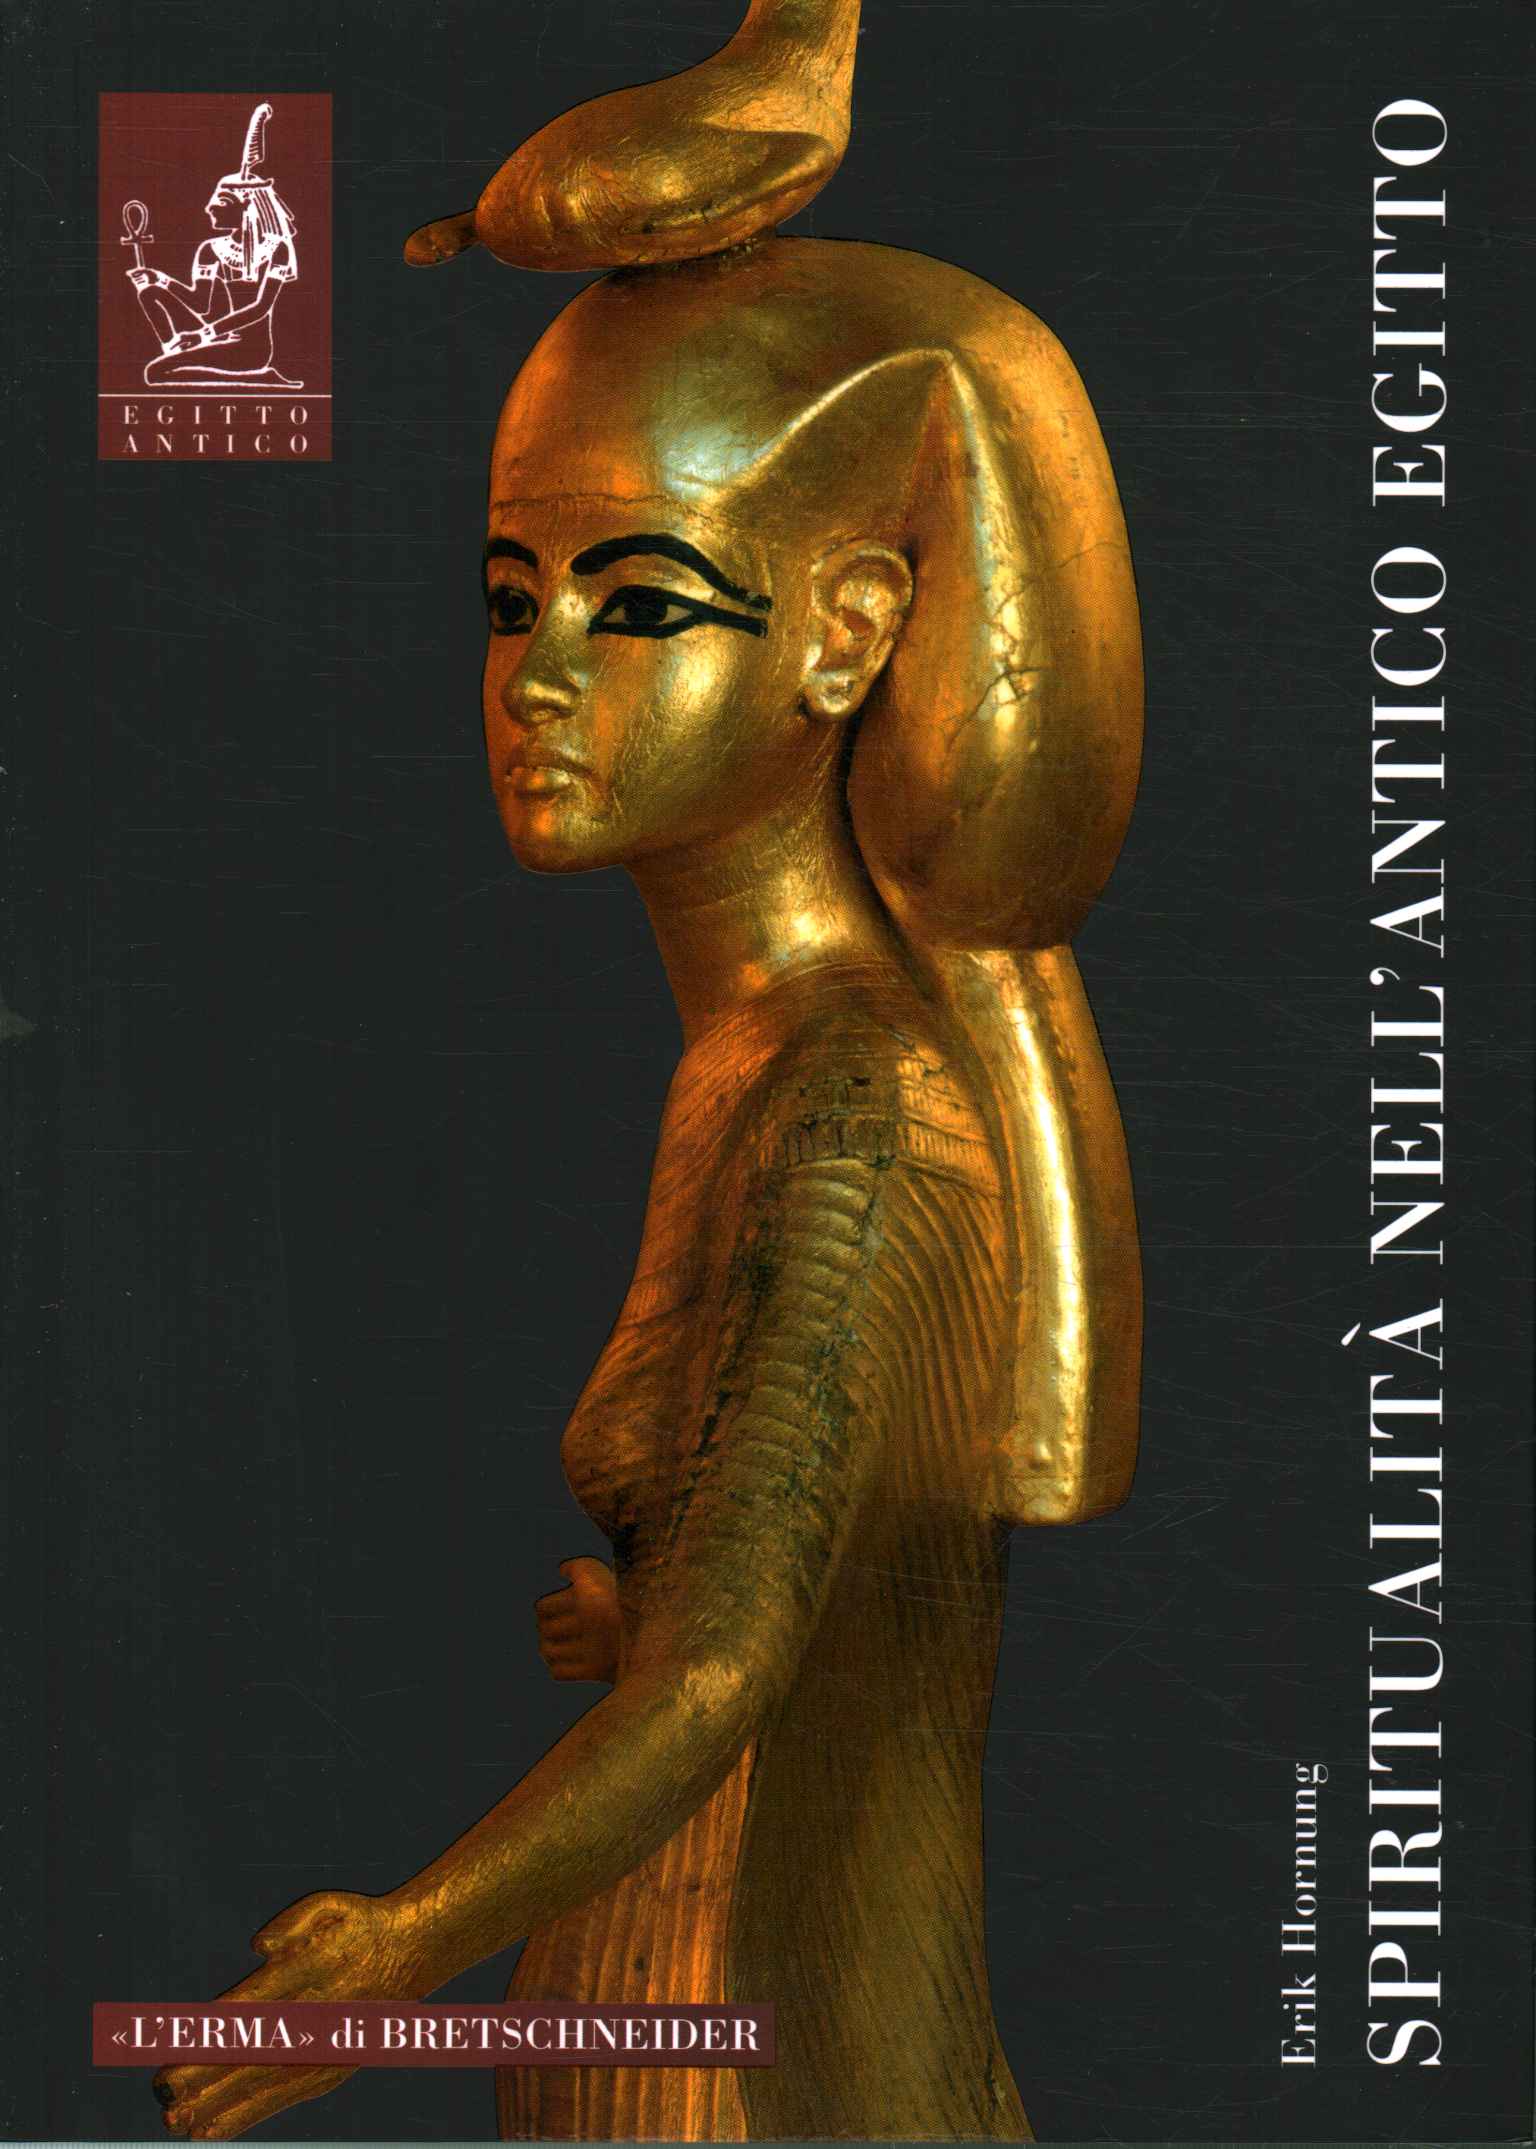 Spirituality in ancient Egypt